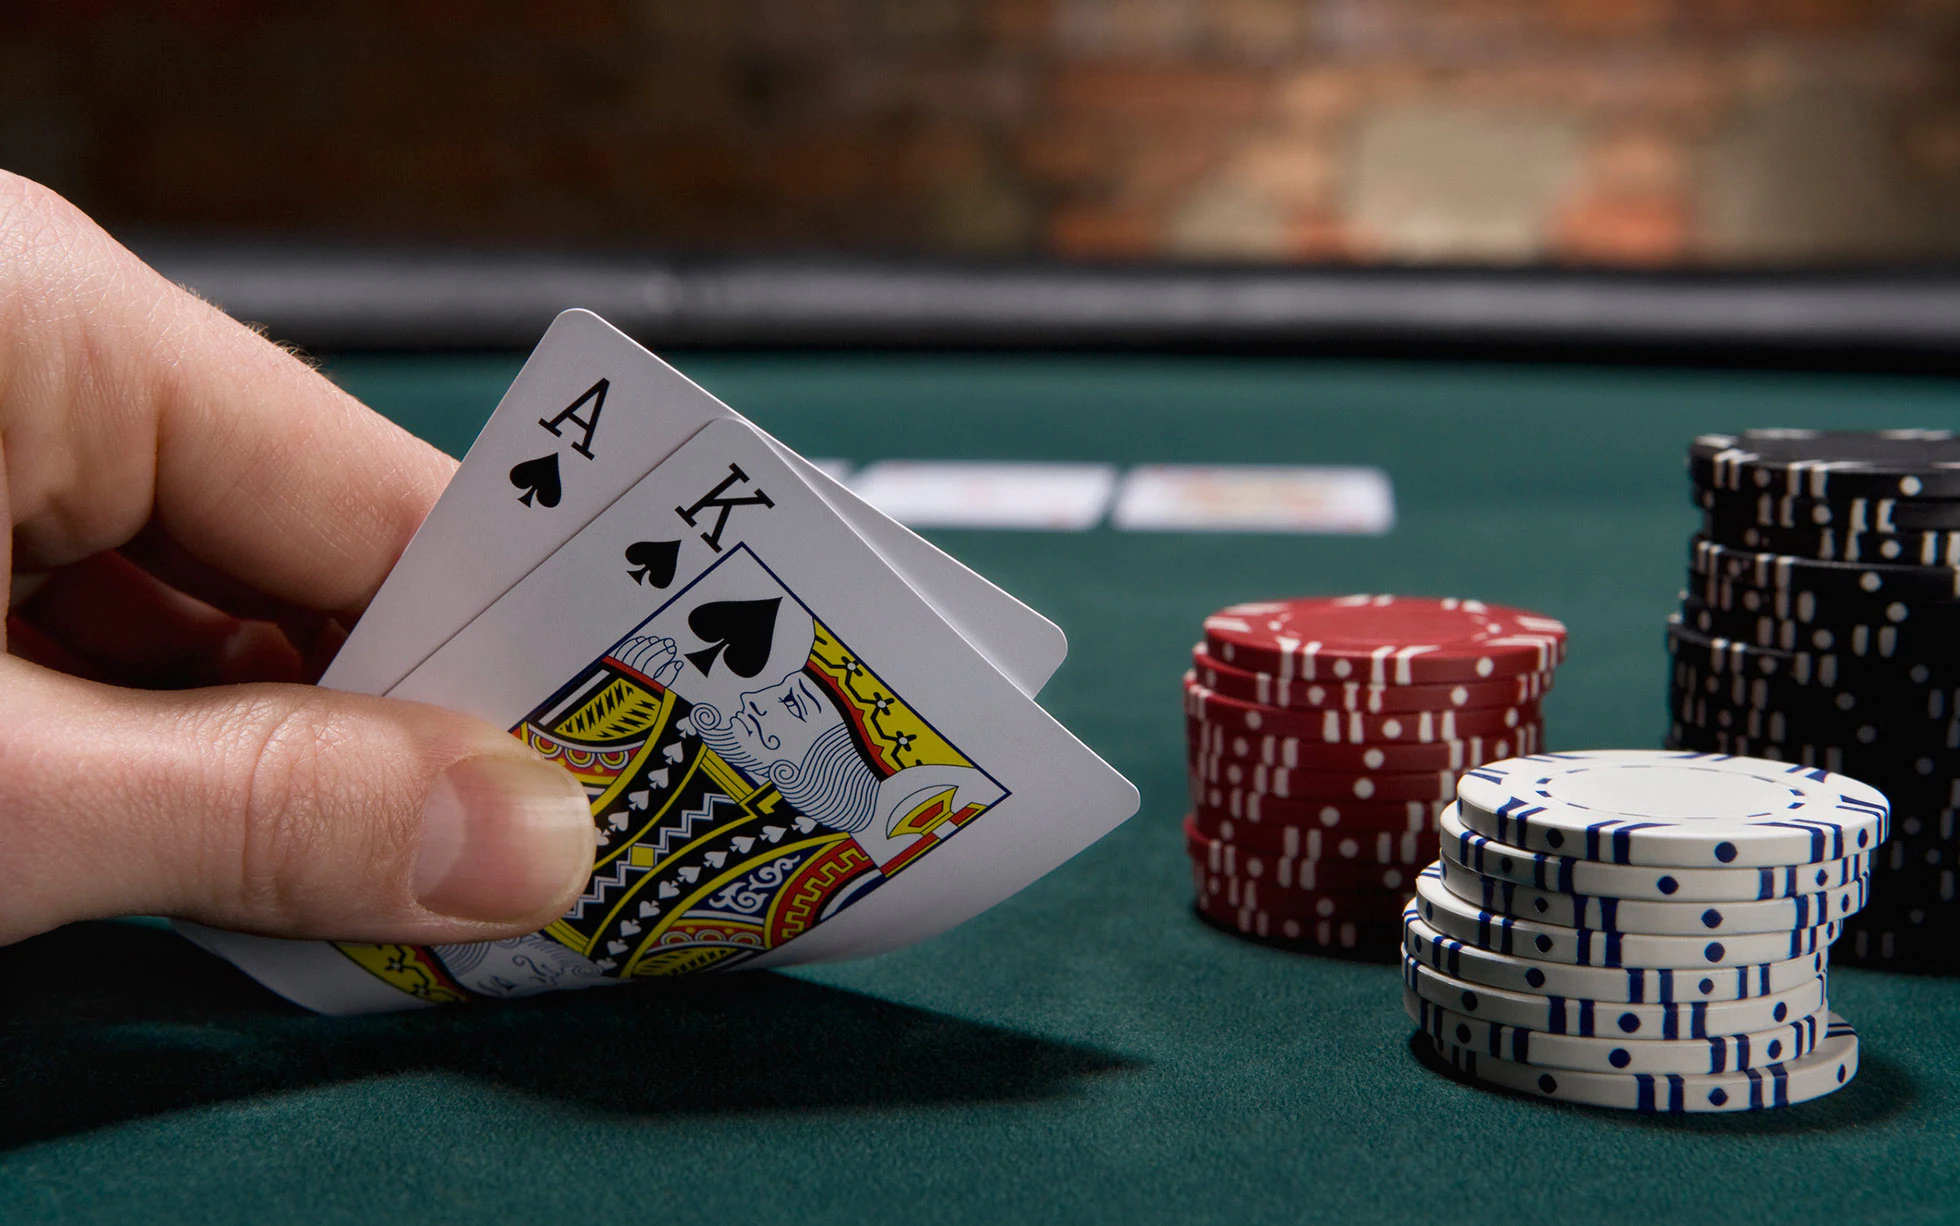 Poker – A Game of Skill and Discipline